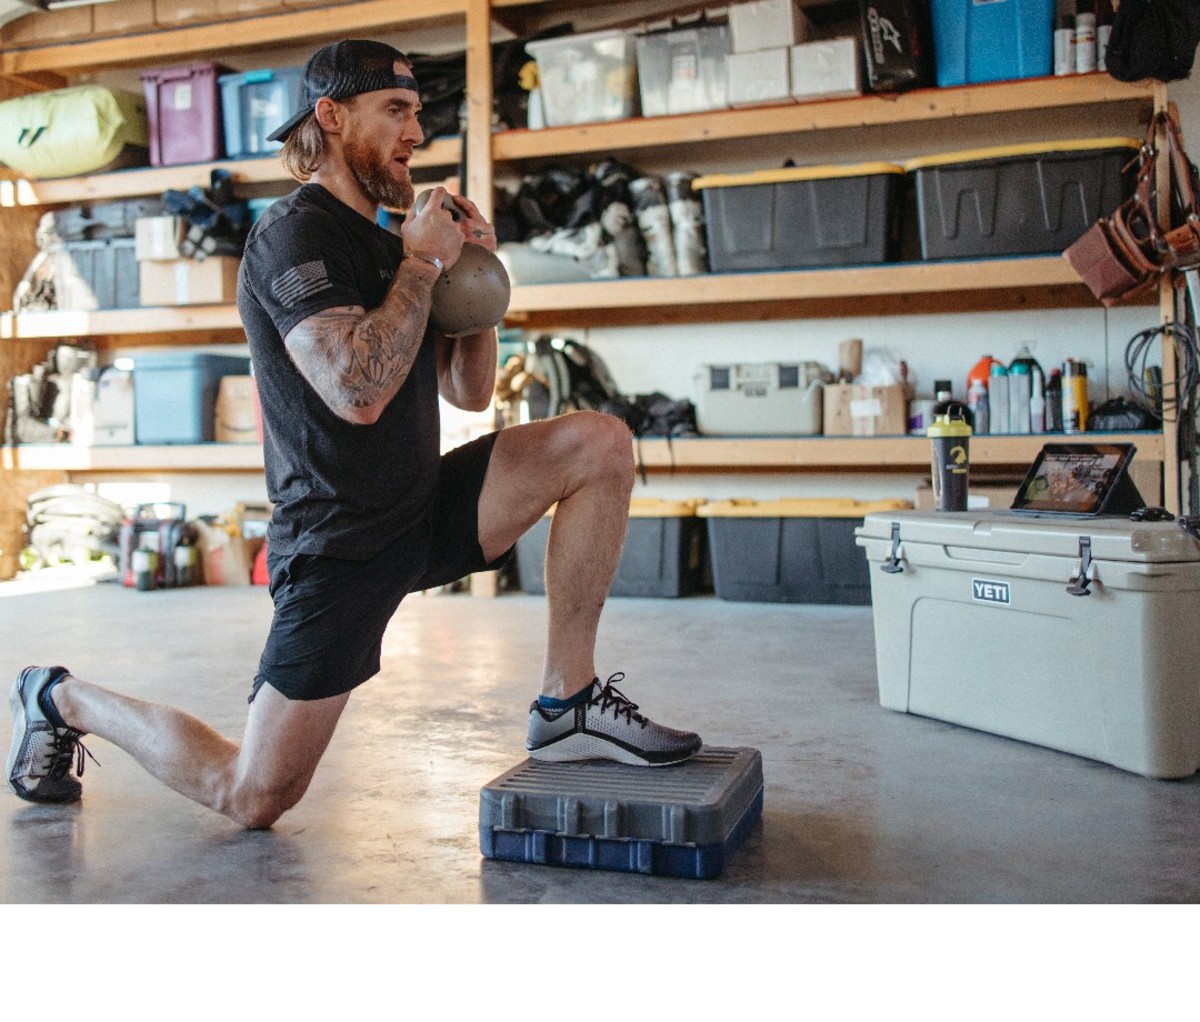 Guy exercising kettle bell in garage, tablet is placed on cooler